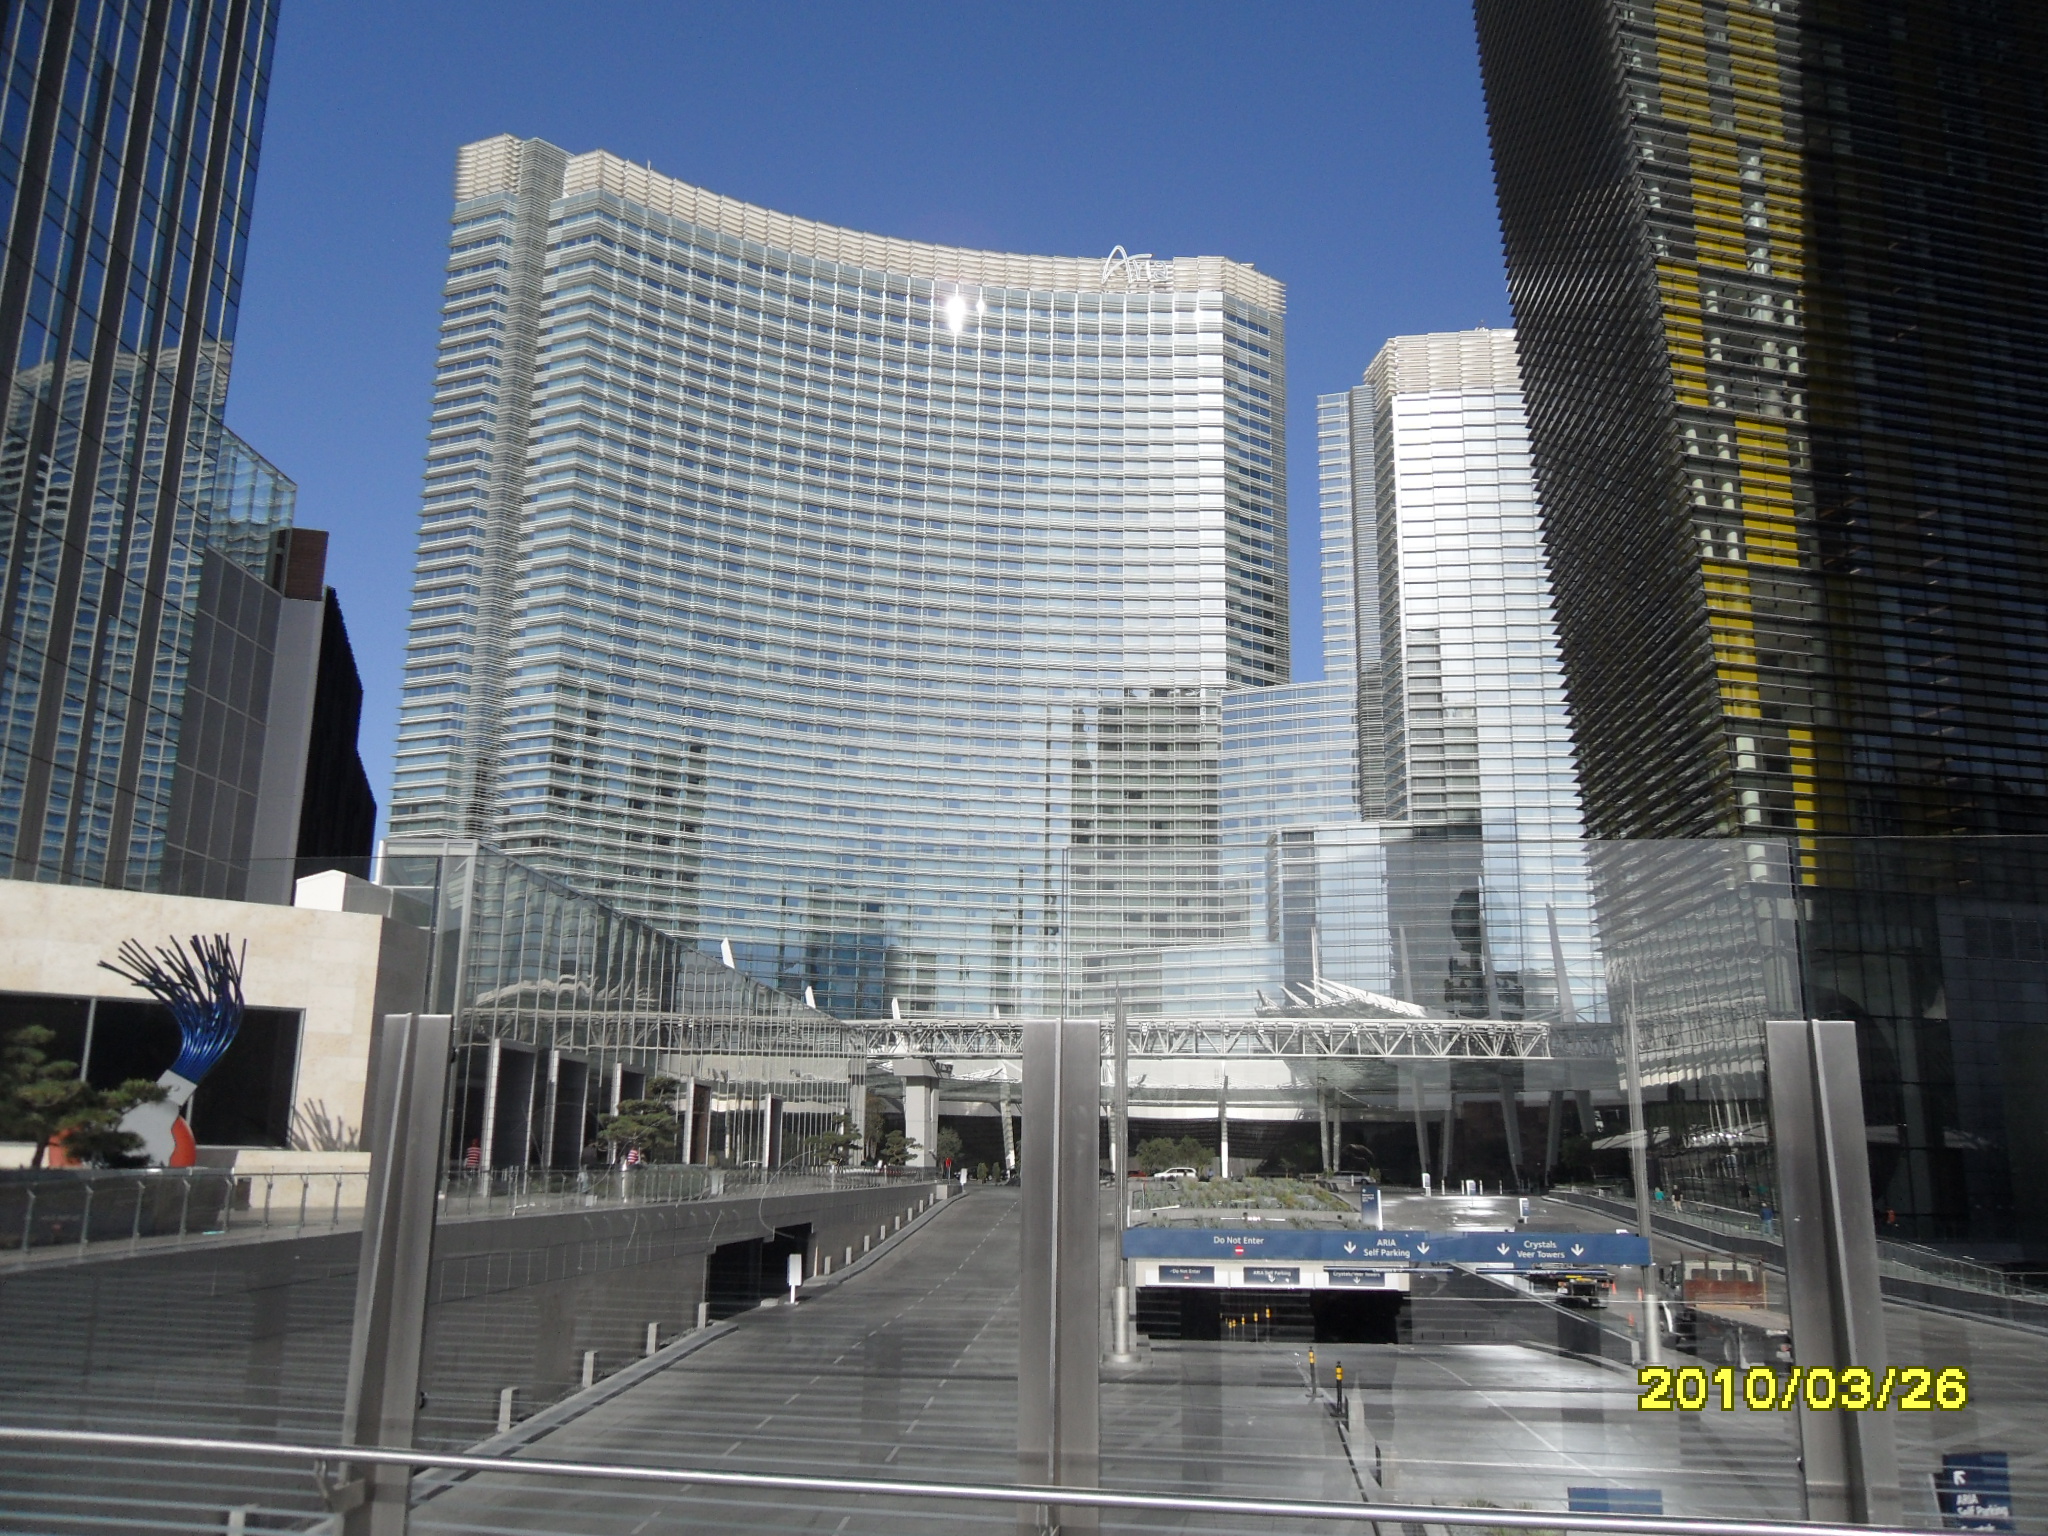 ARIA Resort & Casino: aria express. Rate: Report as inappropriate